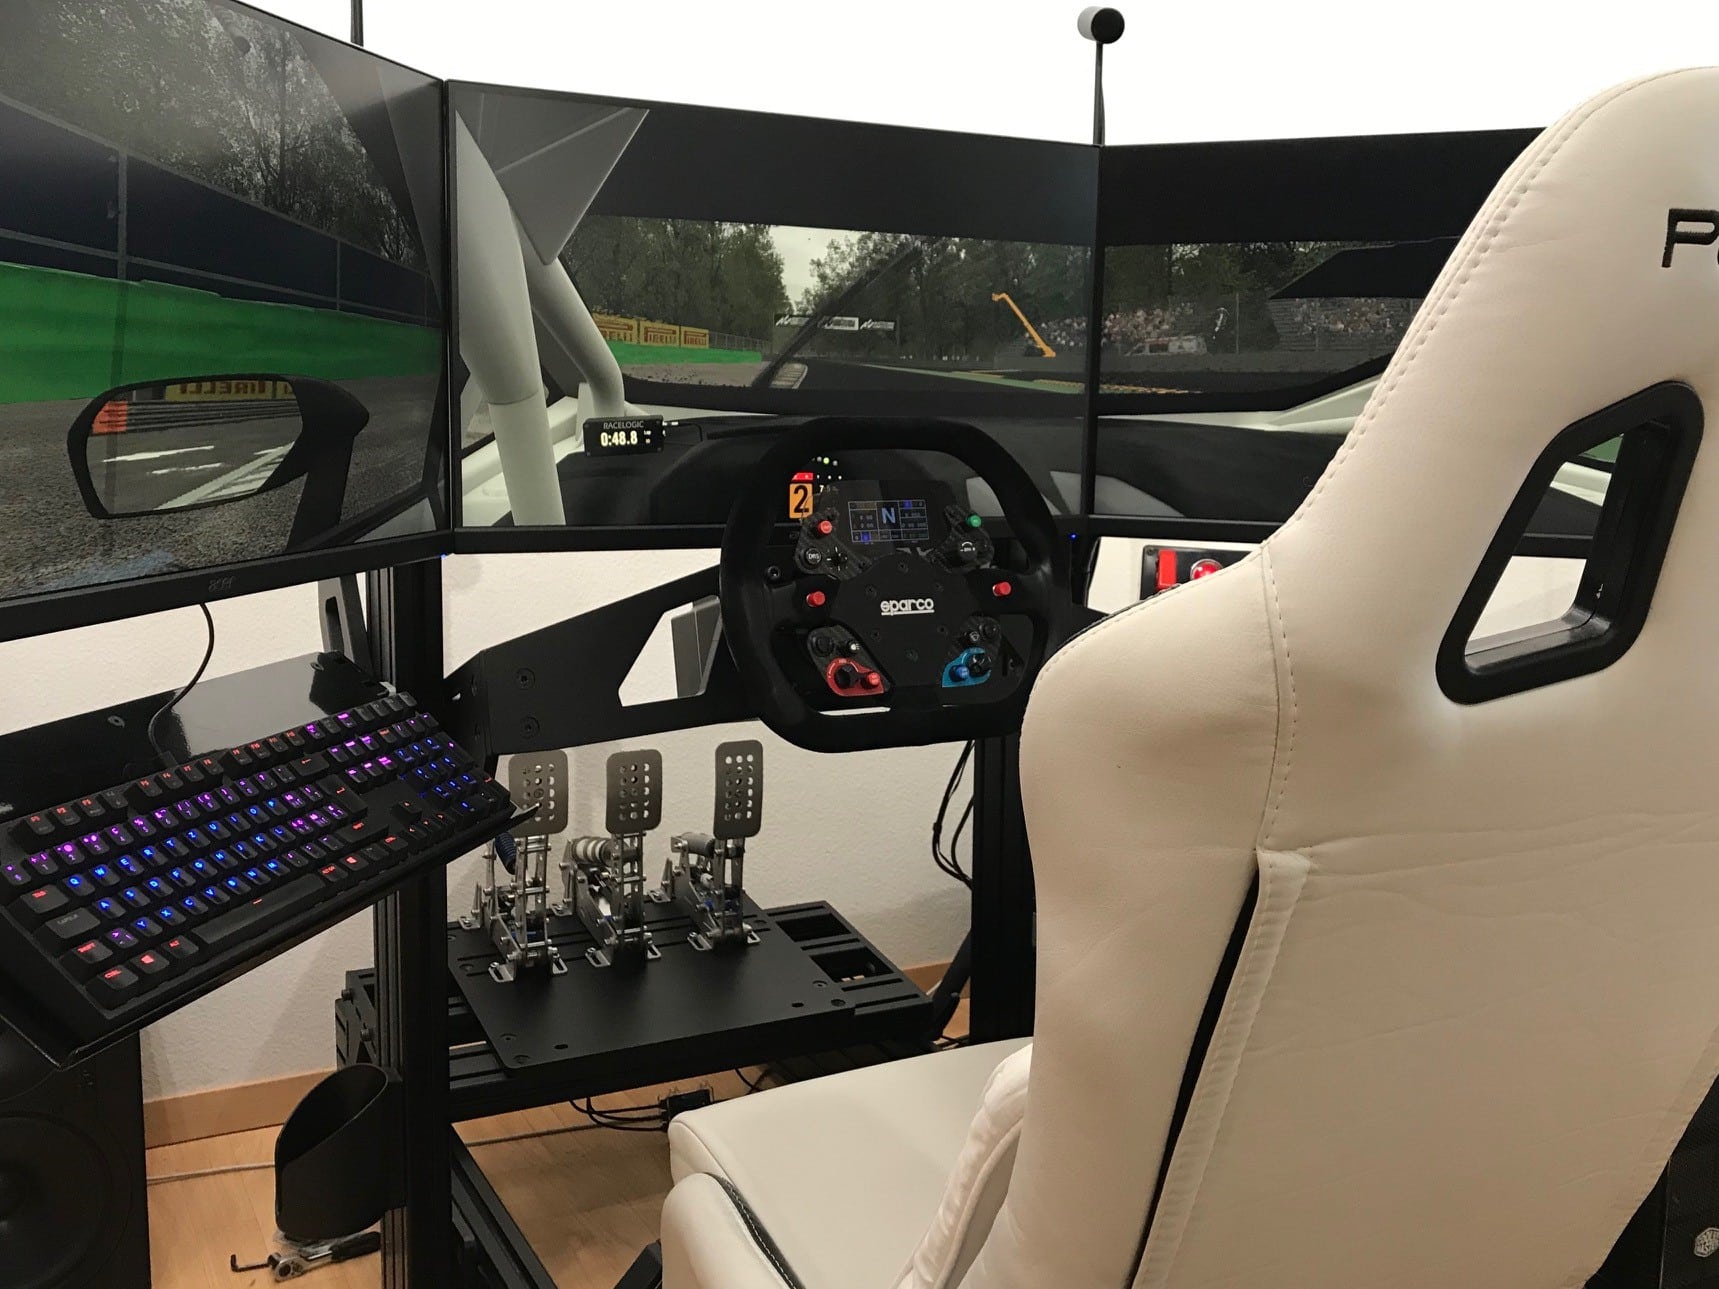 G-Performance is an official Simucube reseller, who distributes Simucube 2 Direct Drive force feedback wheelbases for sim racers and their sim racing simulatiors, together with other Simucube 2 accessories.